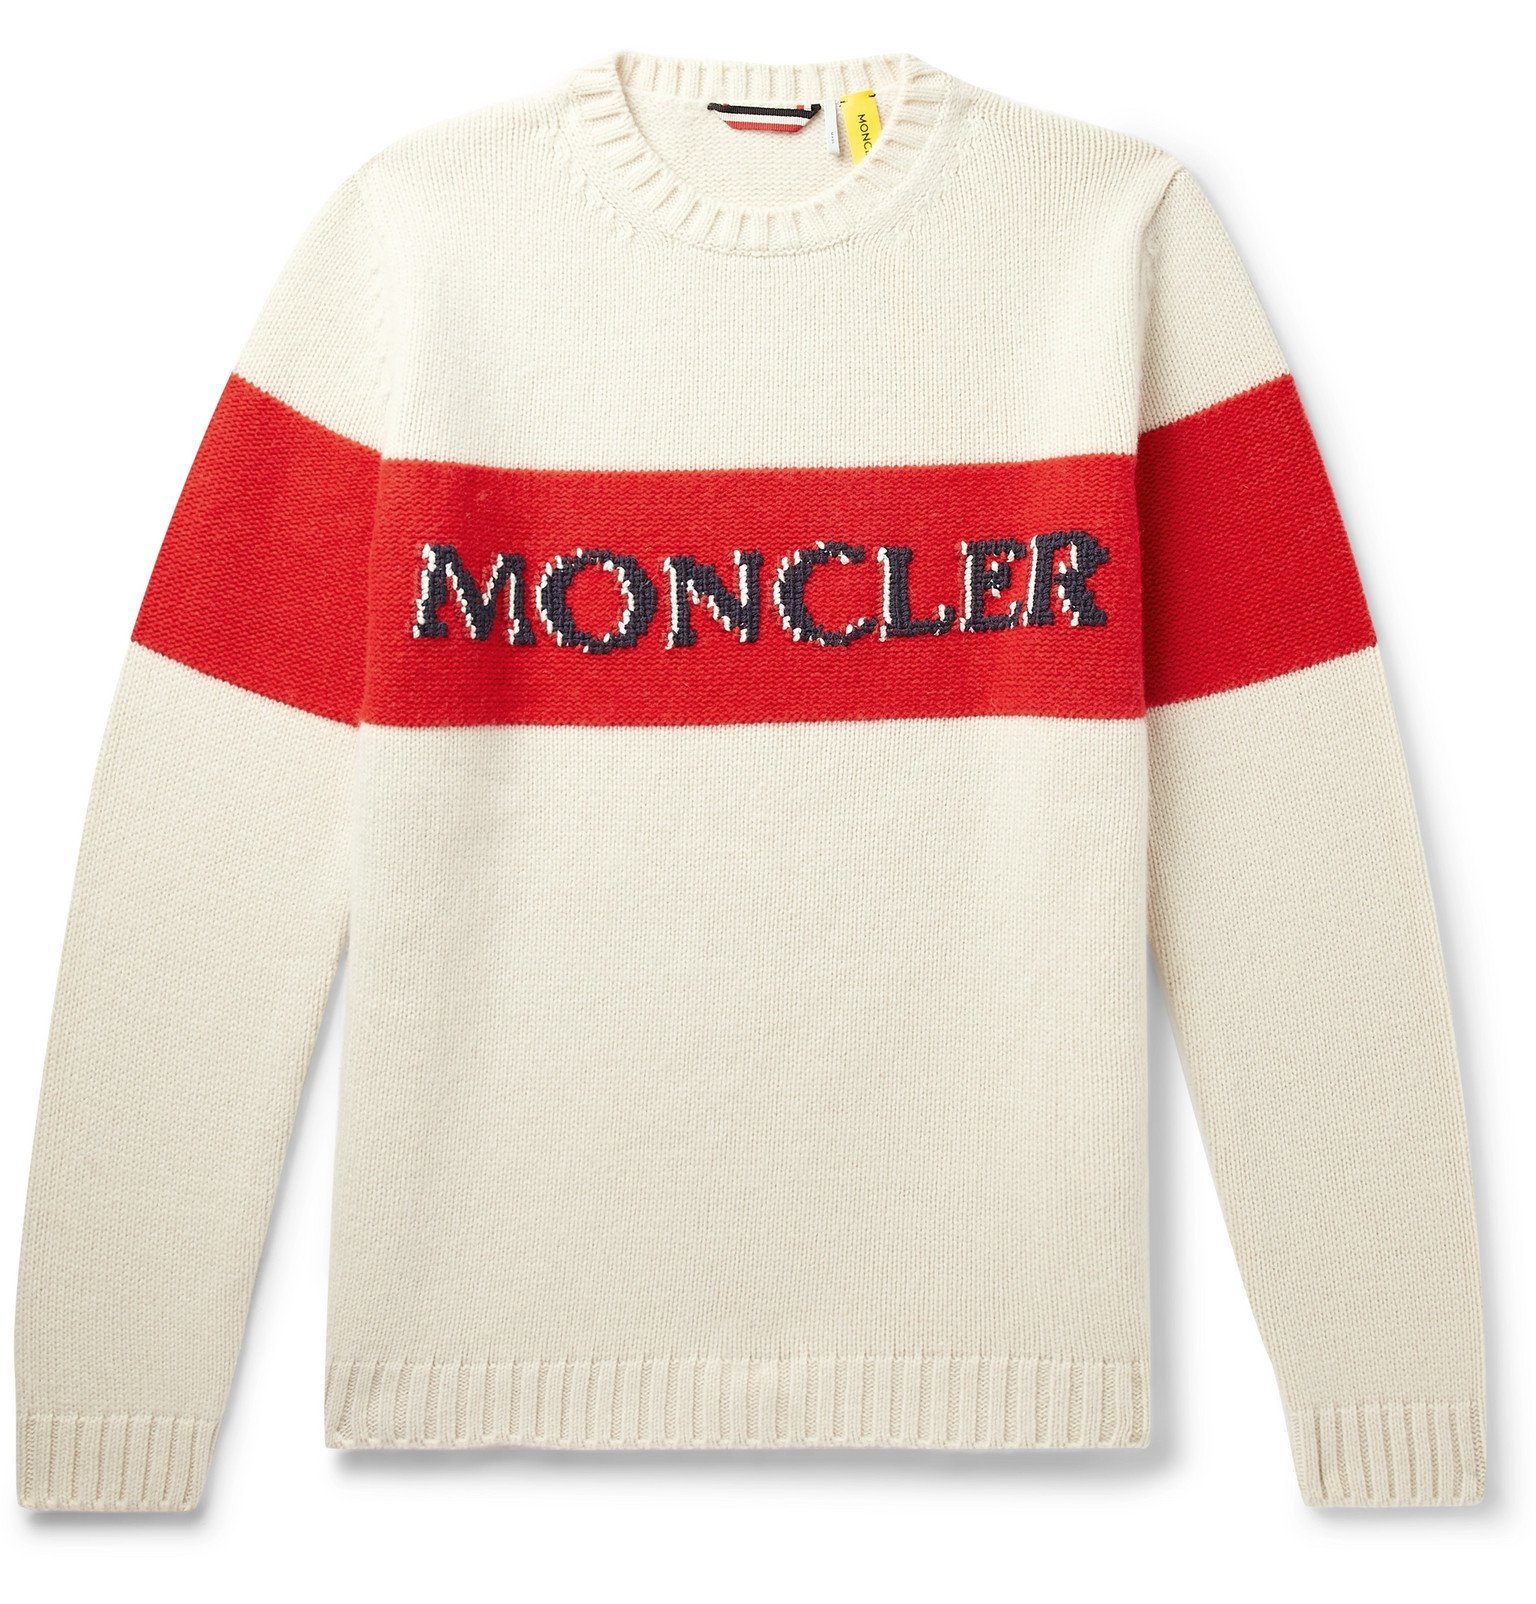 Moncler Wool Sweater Hotsell, 58% OFF | cocula.gob.mx